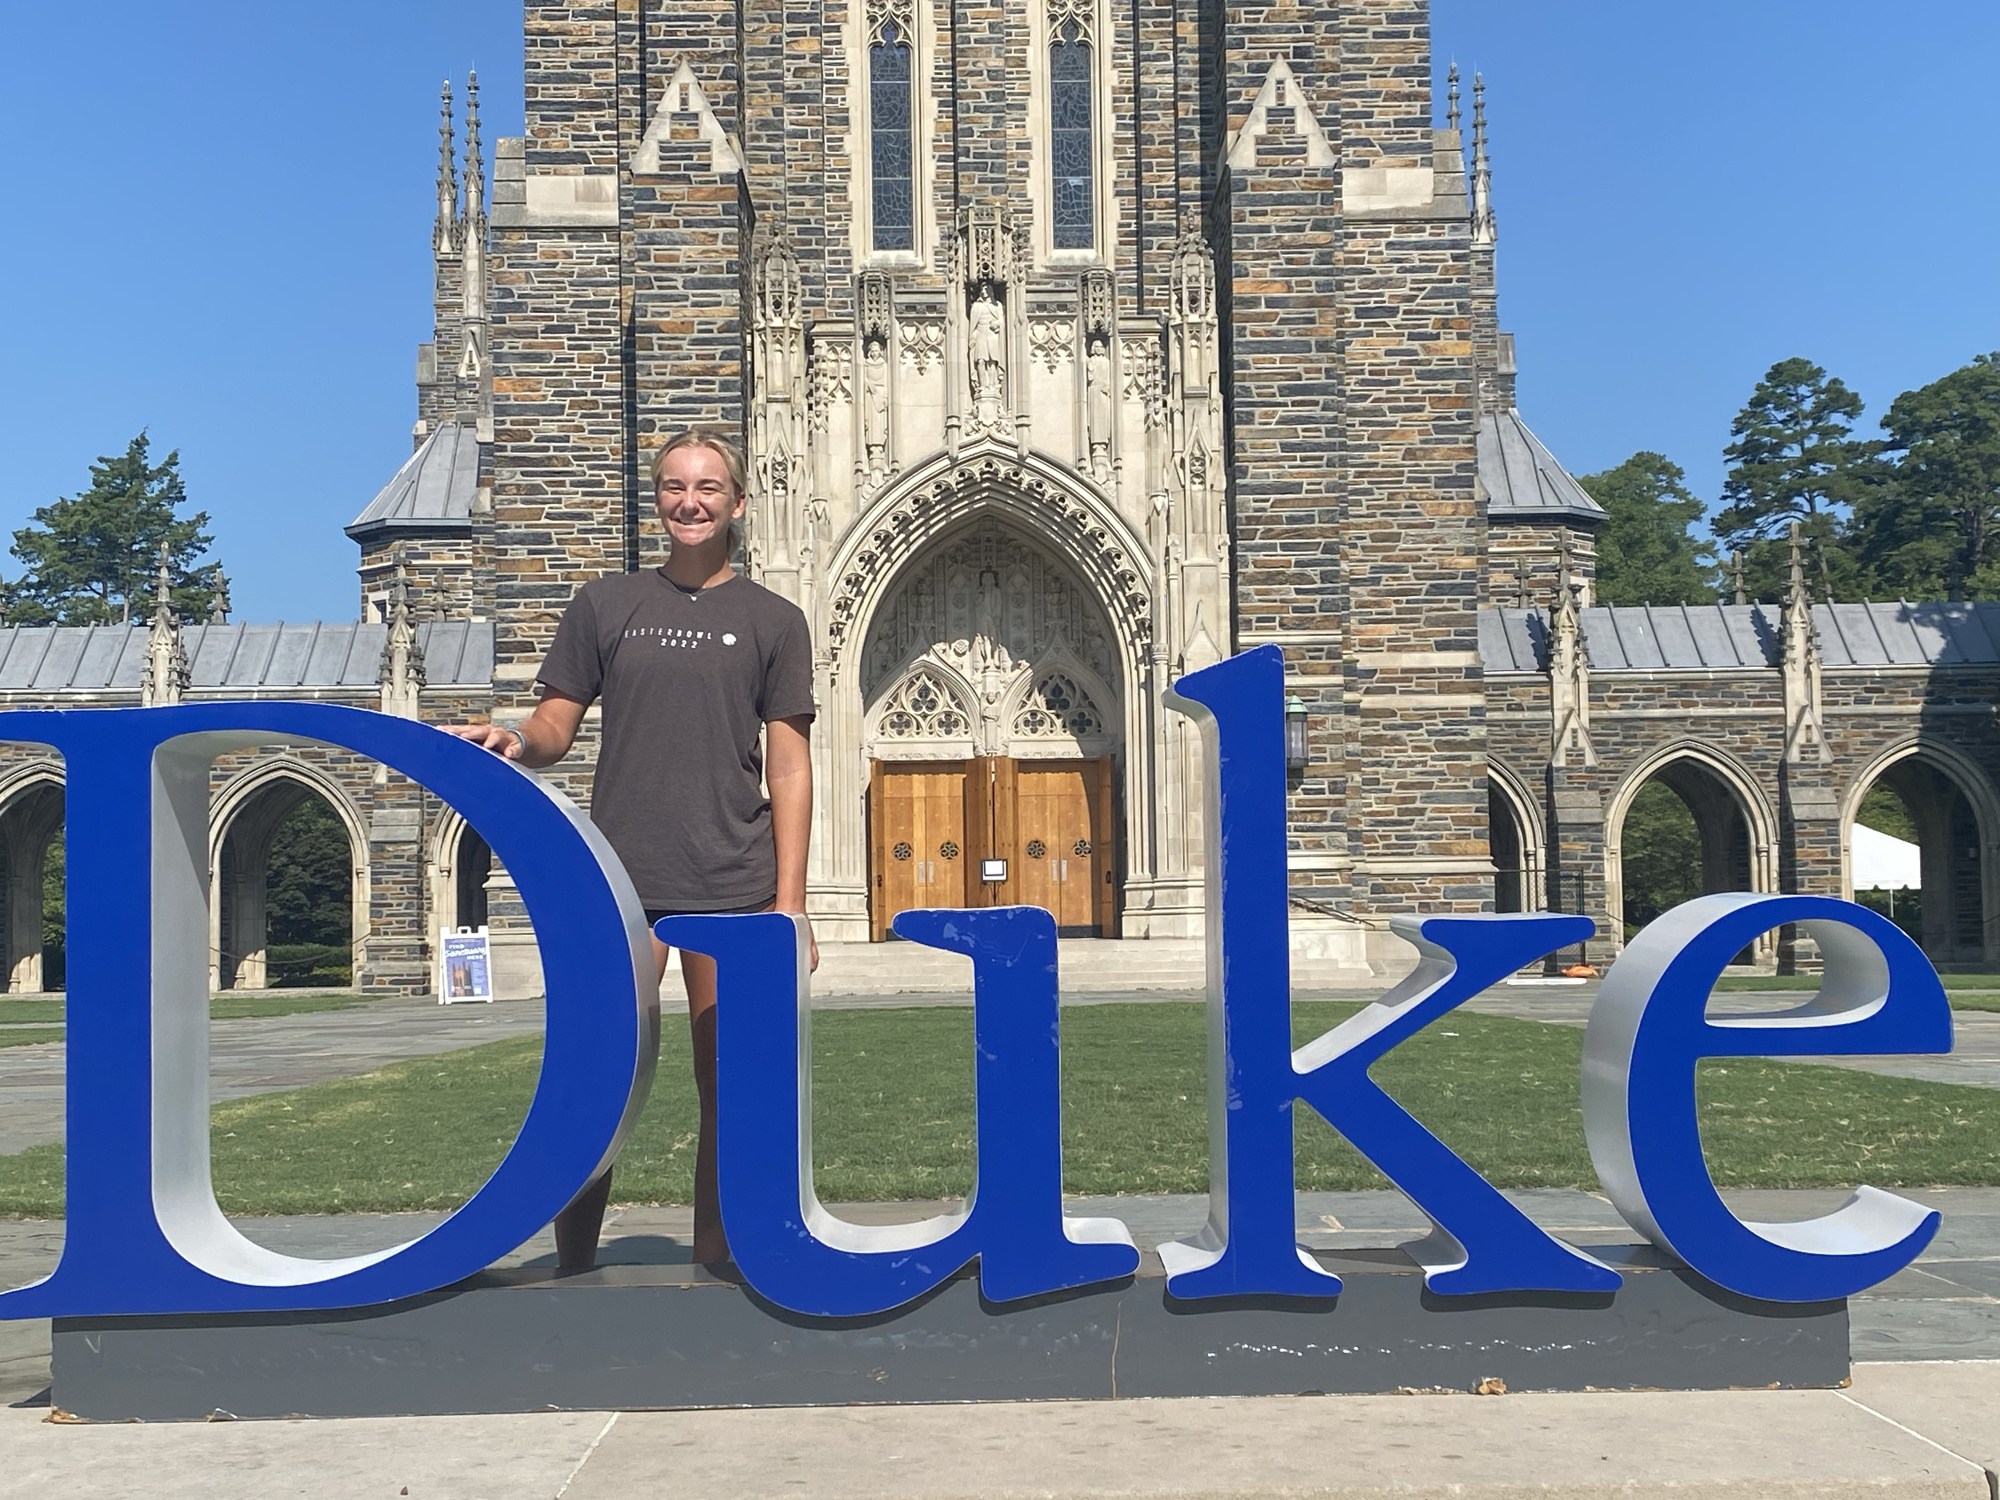 Ava Krug said she is excited to join the Duke tennis program for the school's athletics and academics. (Courtesy photo.)